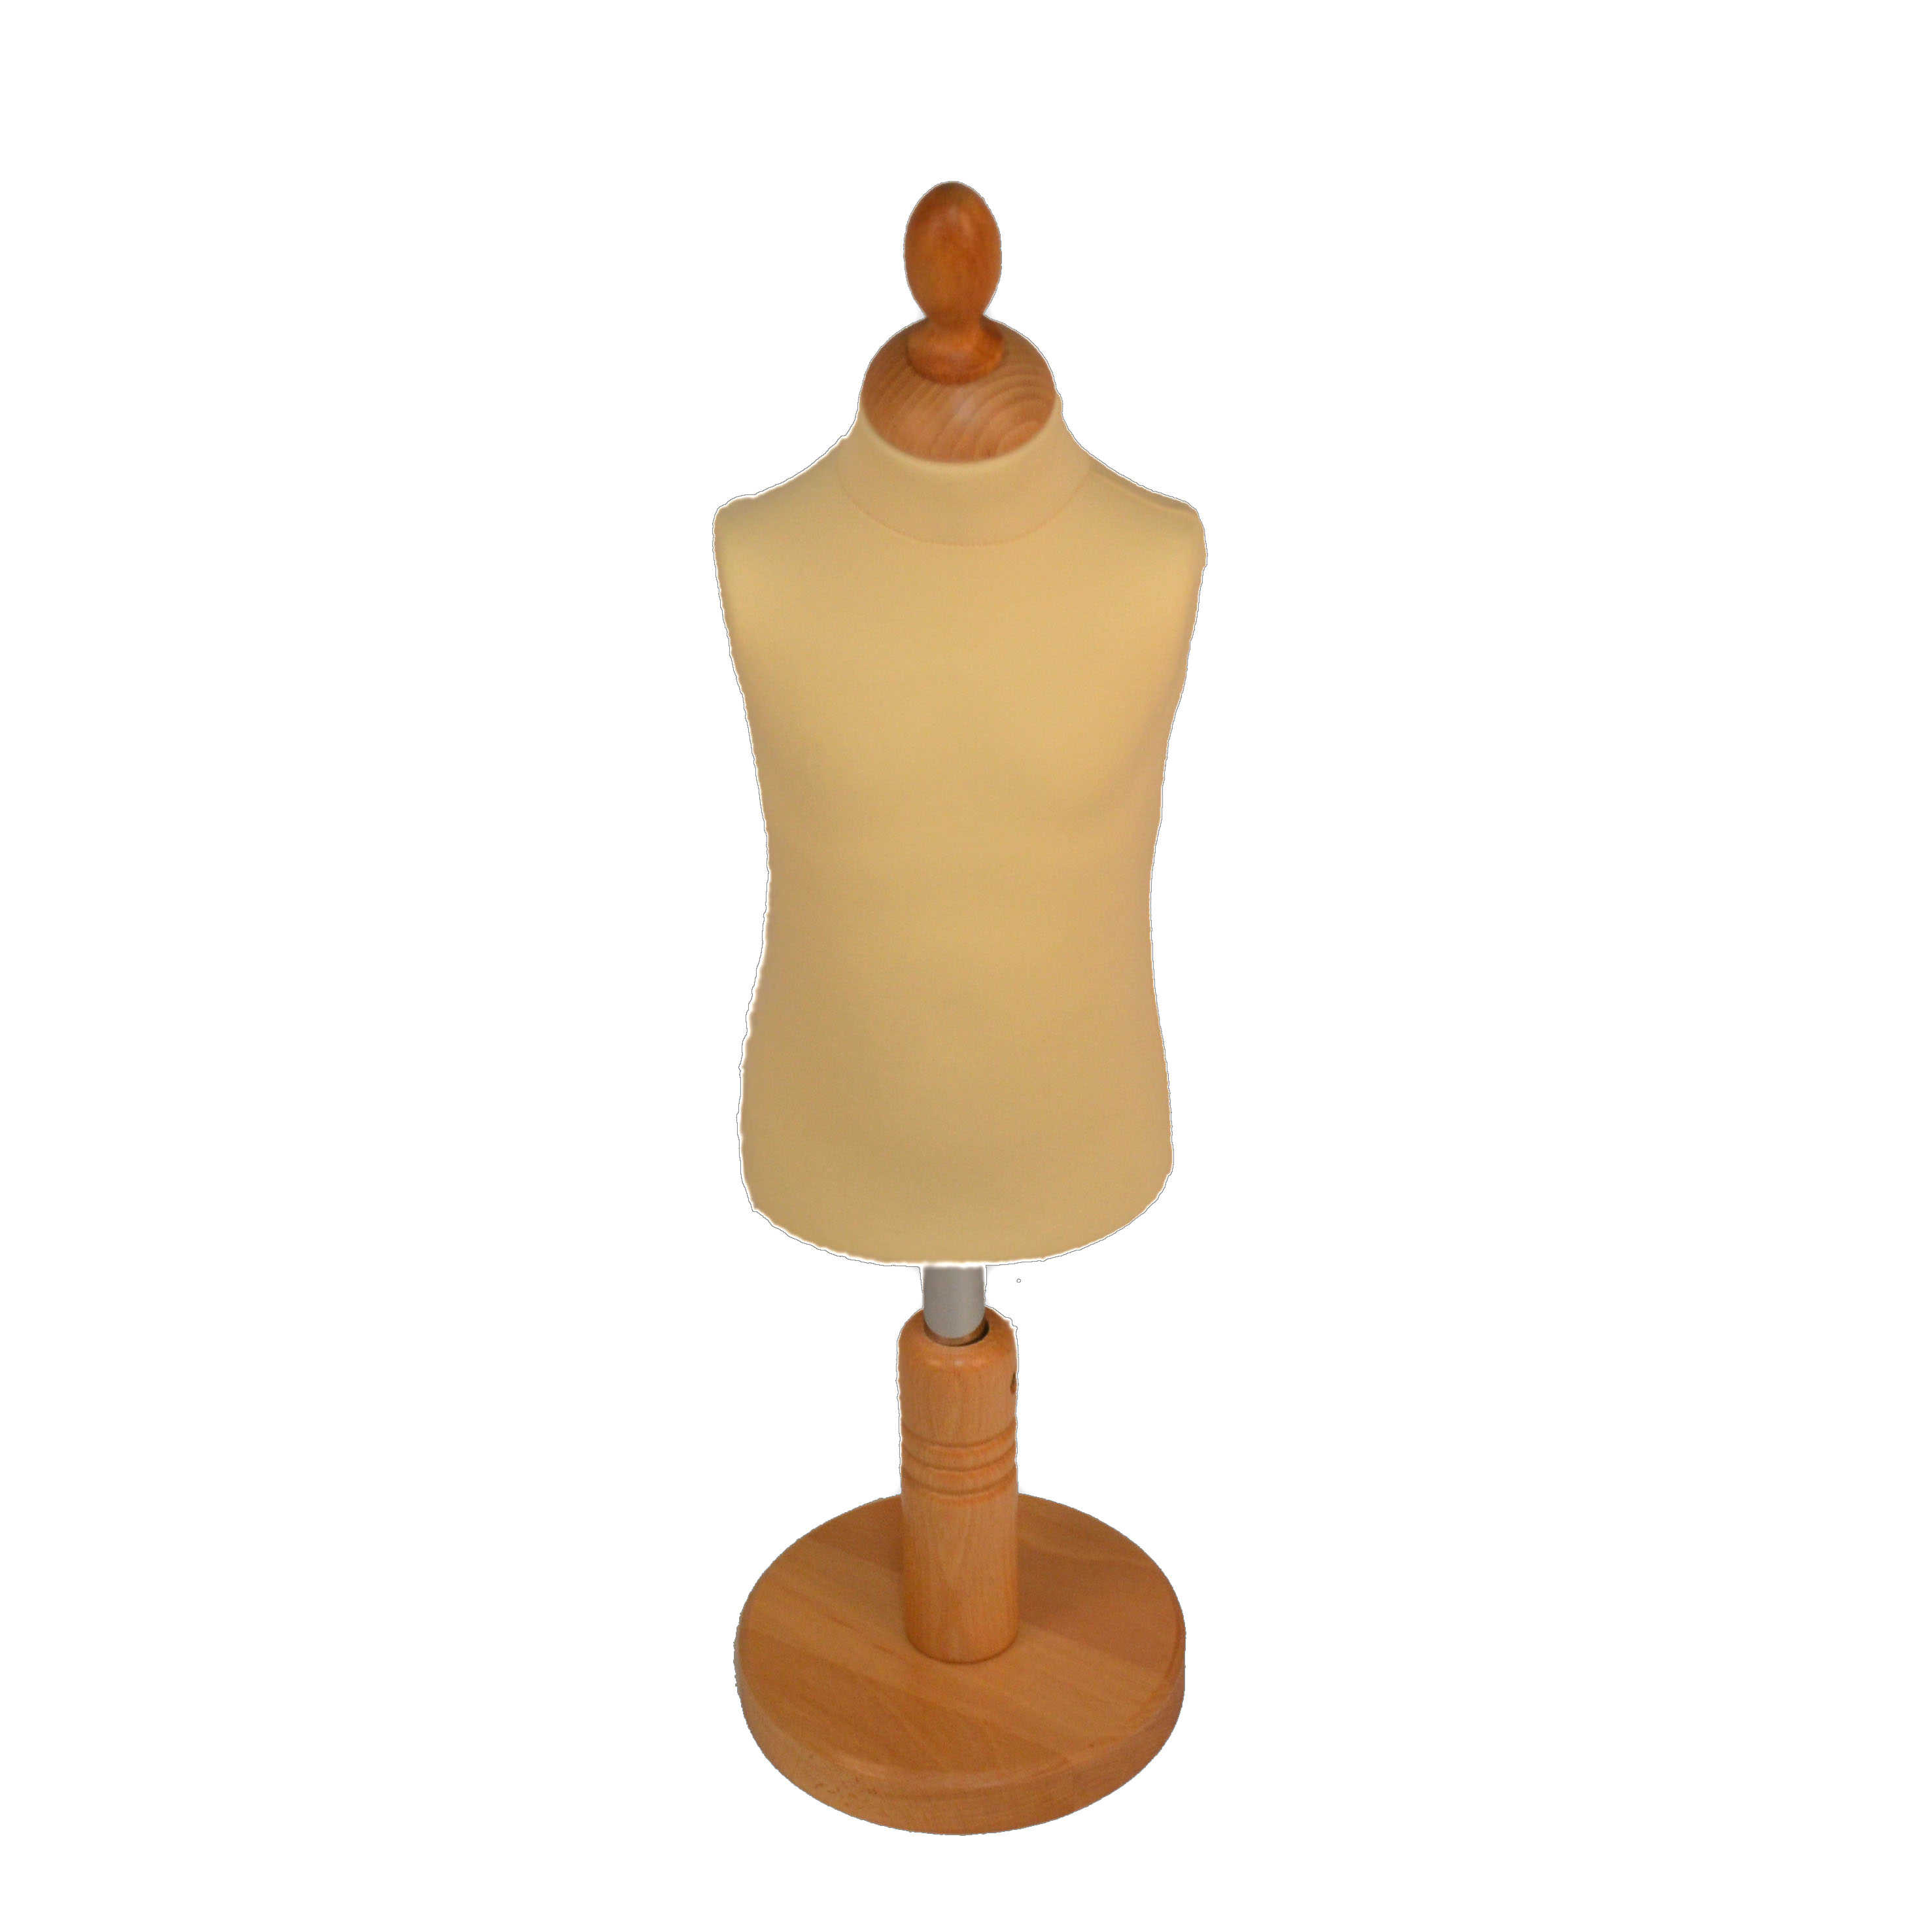 Buy A Toddler Size Tailors' Dummy - Under 1 Year Old | Display Centre